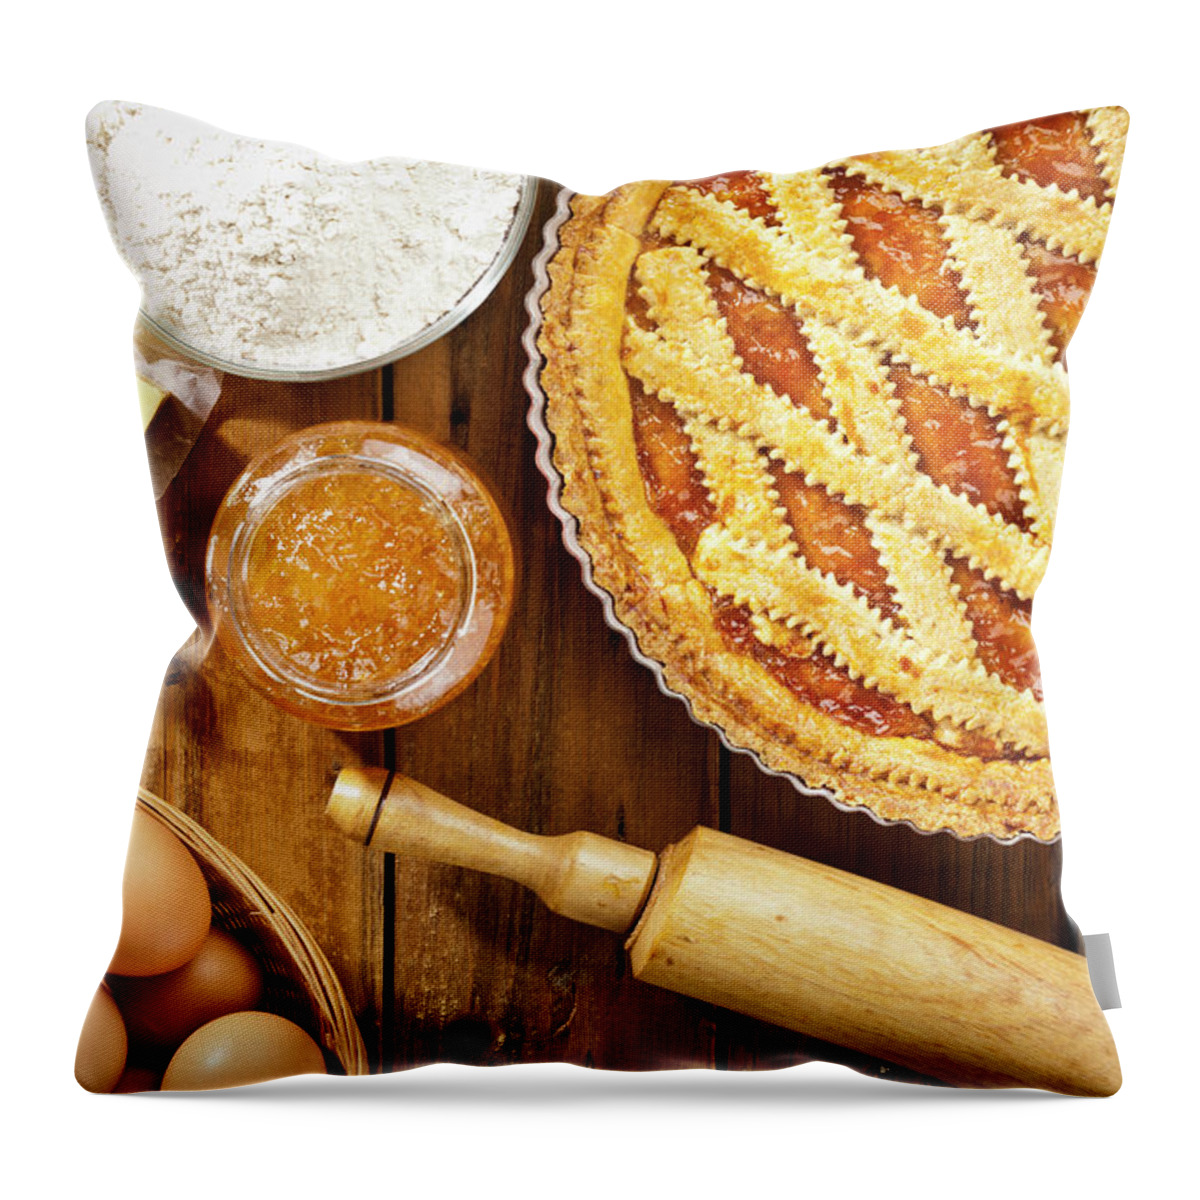 Breakfast Throw Pillow featuring the photograph Homemade Italian Crostata With by Fcafotodigital